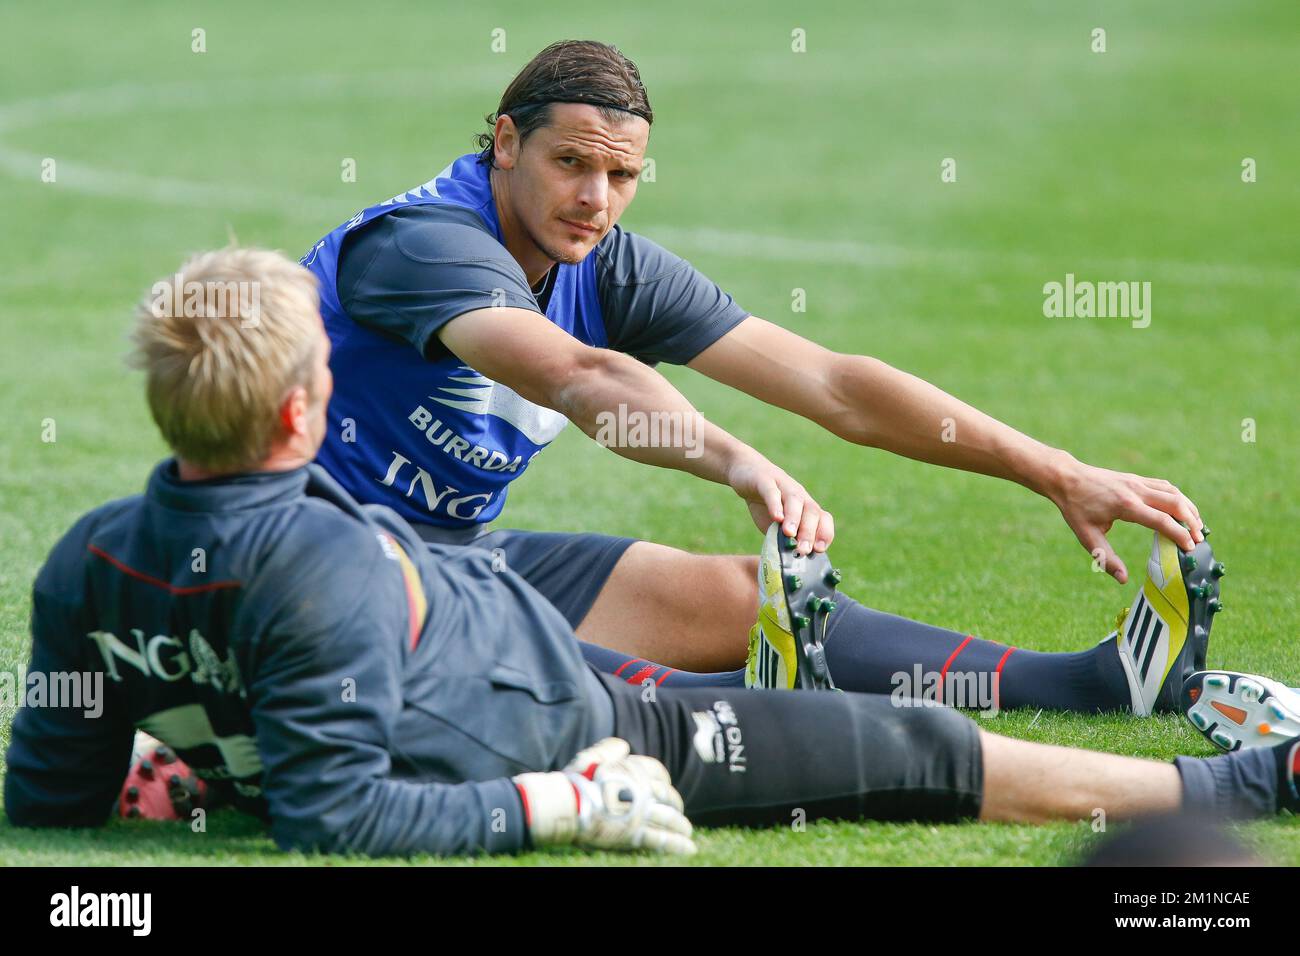 20120910 - BRUSSELS, BELGIUM: Belgium's Daniel Van Buyten pictured during a training session of the Red Devils, the Belgian national soccer team, Monday 10 September 2012 at the King Baudouin stadium, in Brussels. The team is preparing for the second qualifying match for the 2014 Soccer World Championships, against Croatia tomorrow. BELGA PHOTO BRUNO FAHY Stock Photo